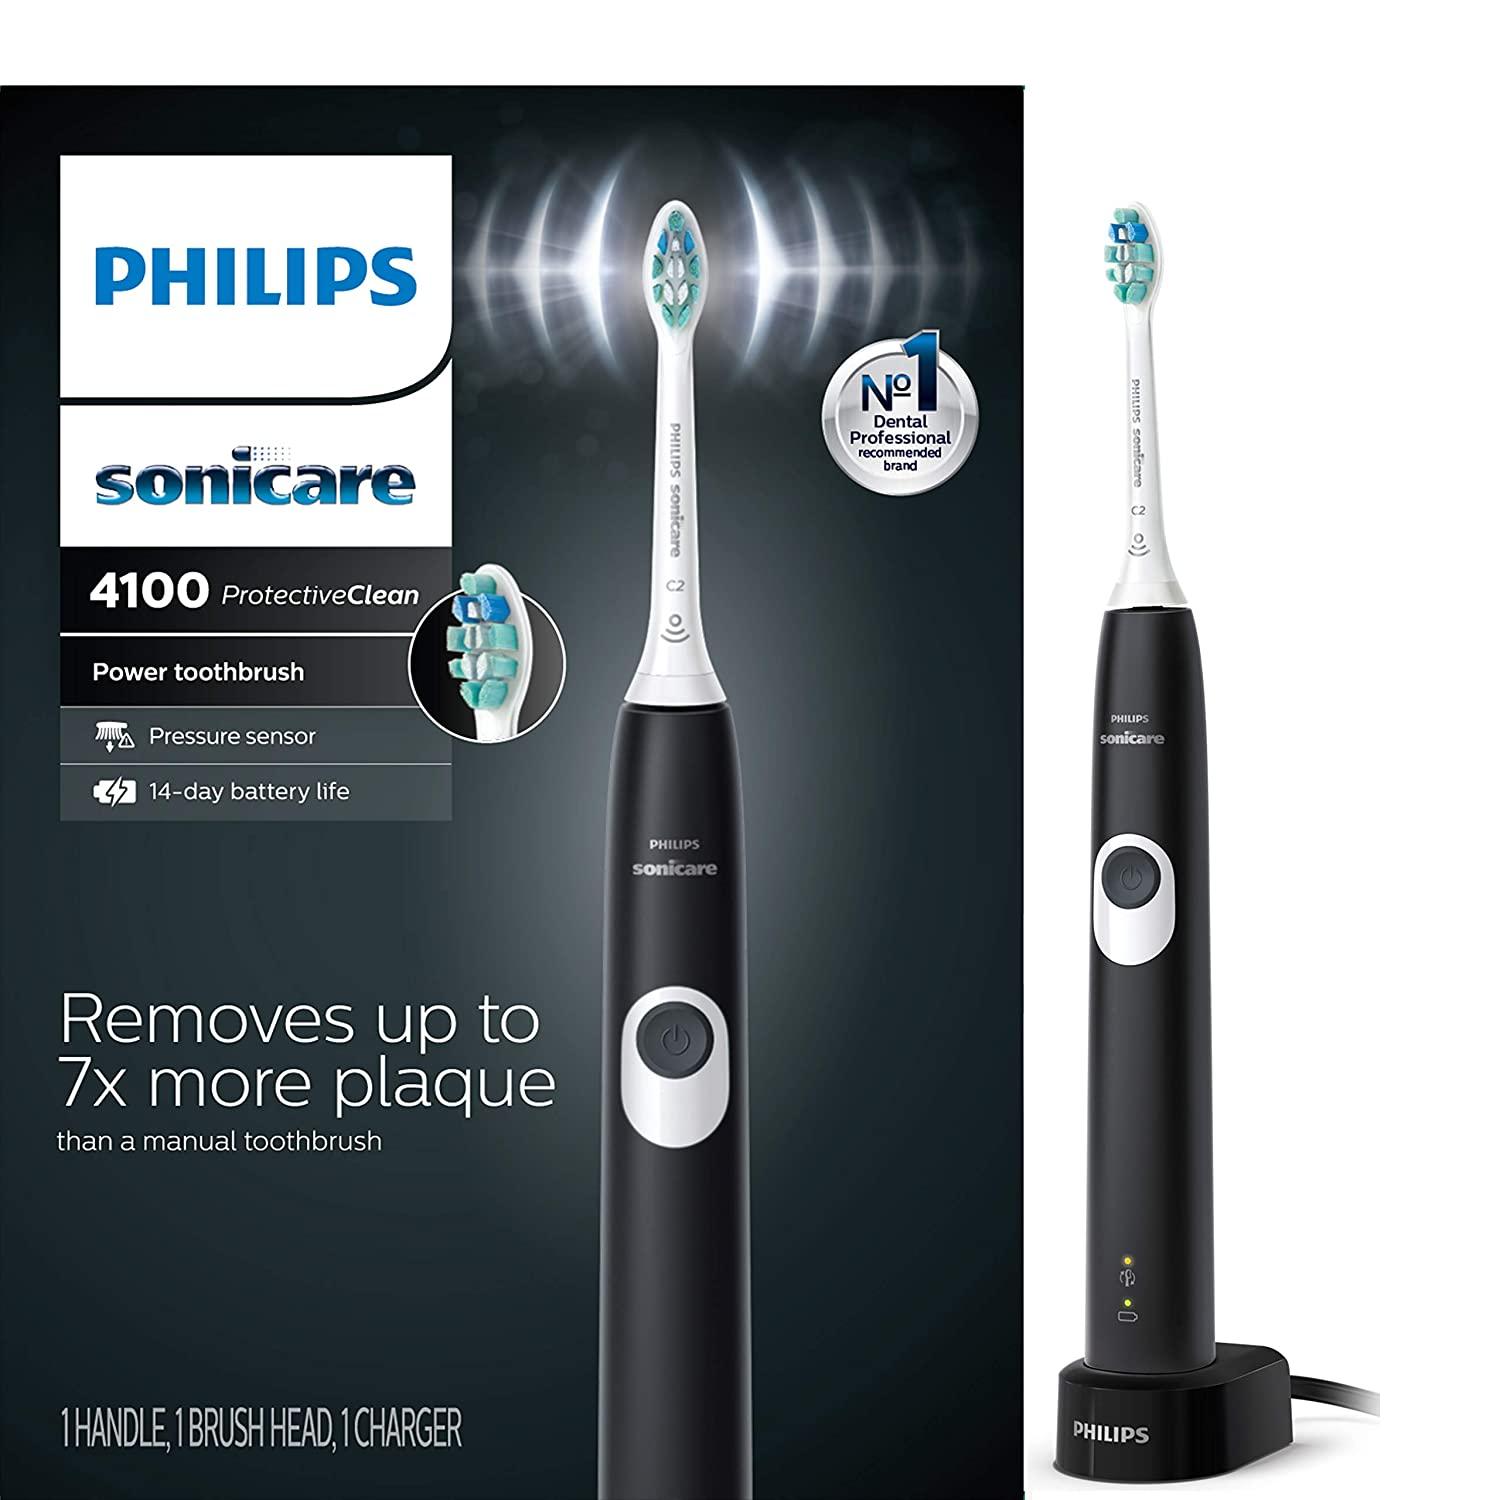 Philips Sonicare Protective Clean 4100 Black Electric Toothbrush for $26.99